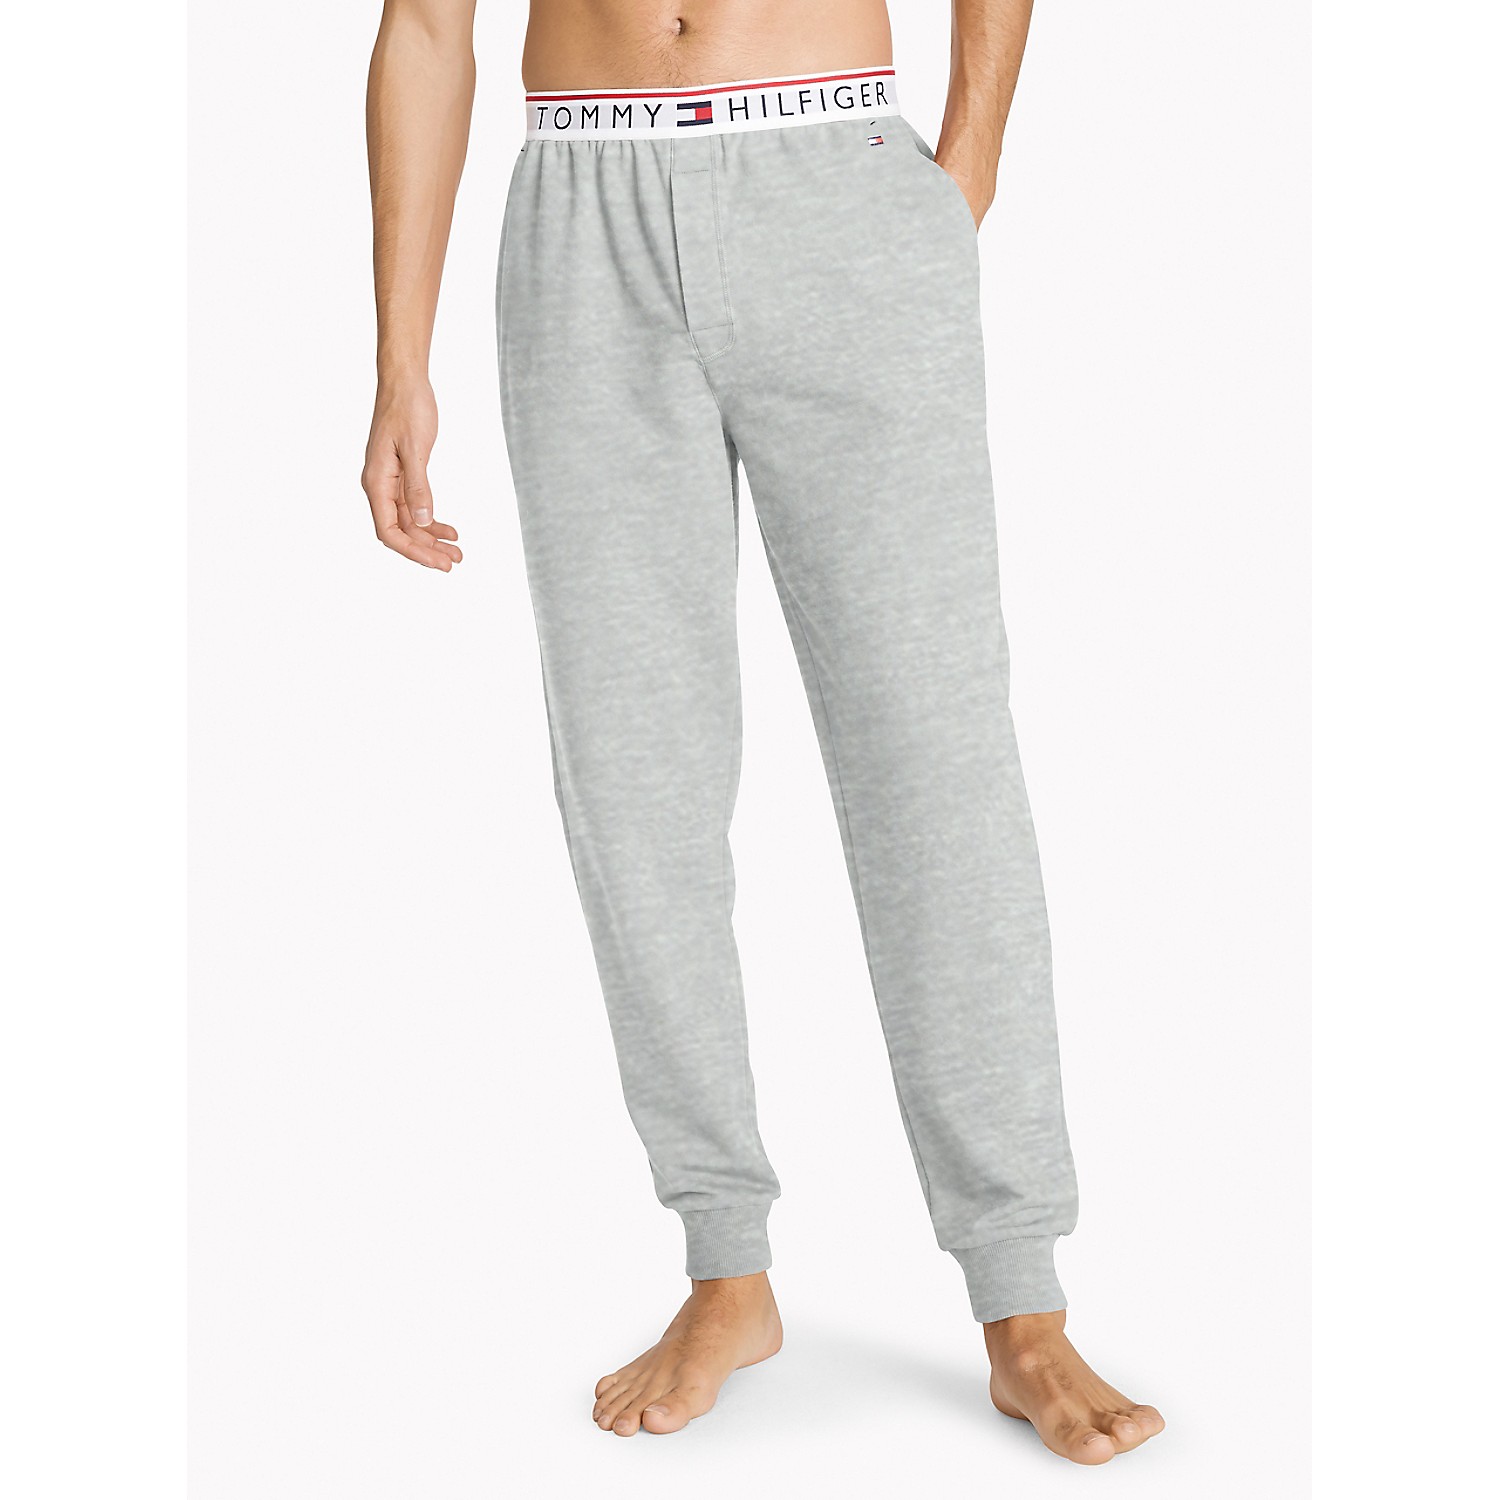 TOMMY HILFIGER French Terry Lounge Jogger